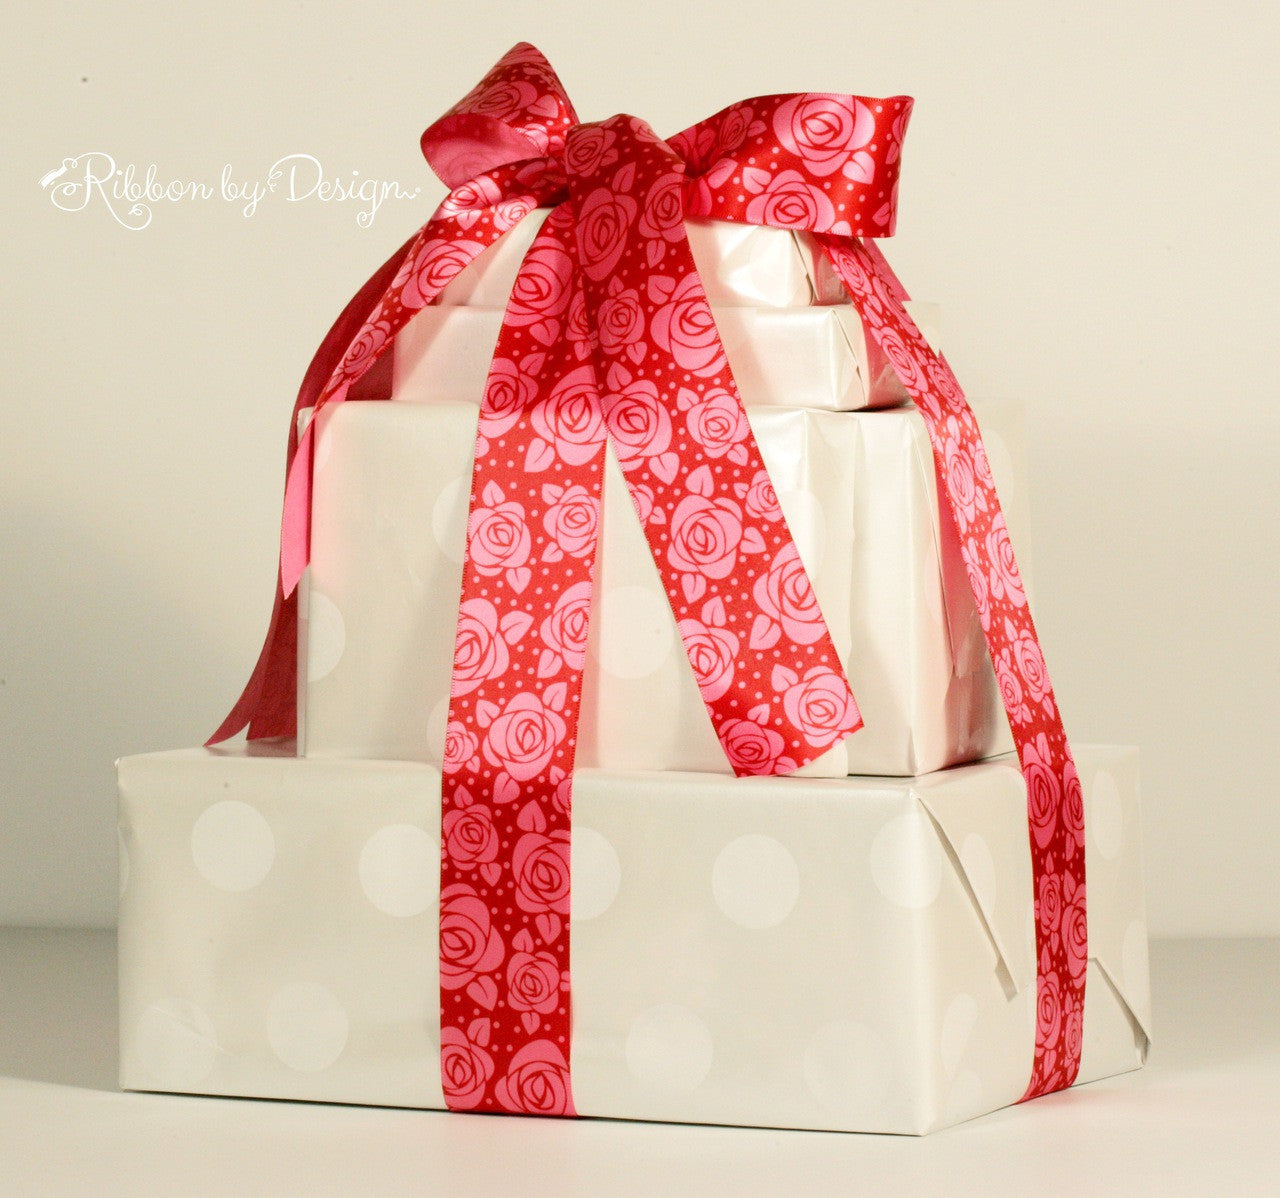 A tower of gifts for a special Valentine is sure to make the day lots of fun!